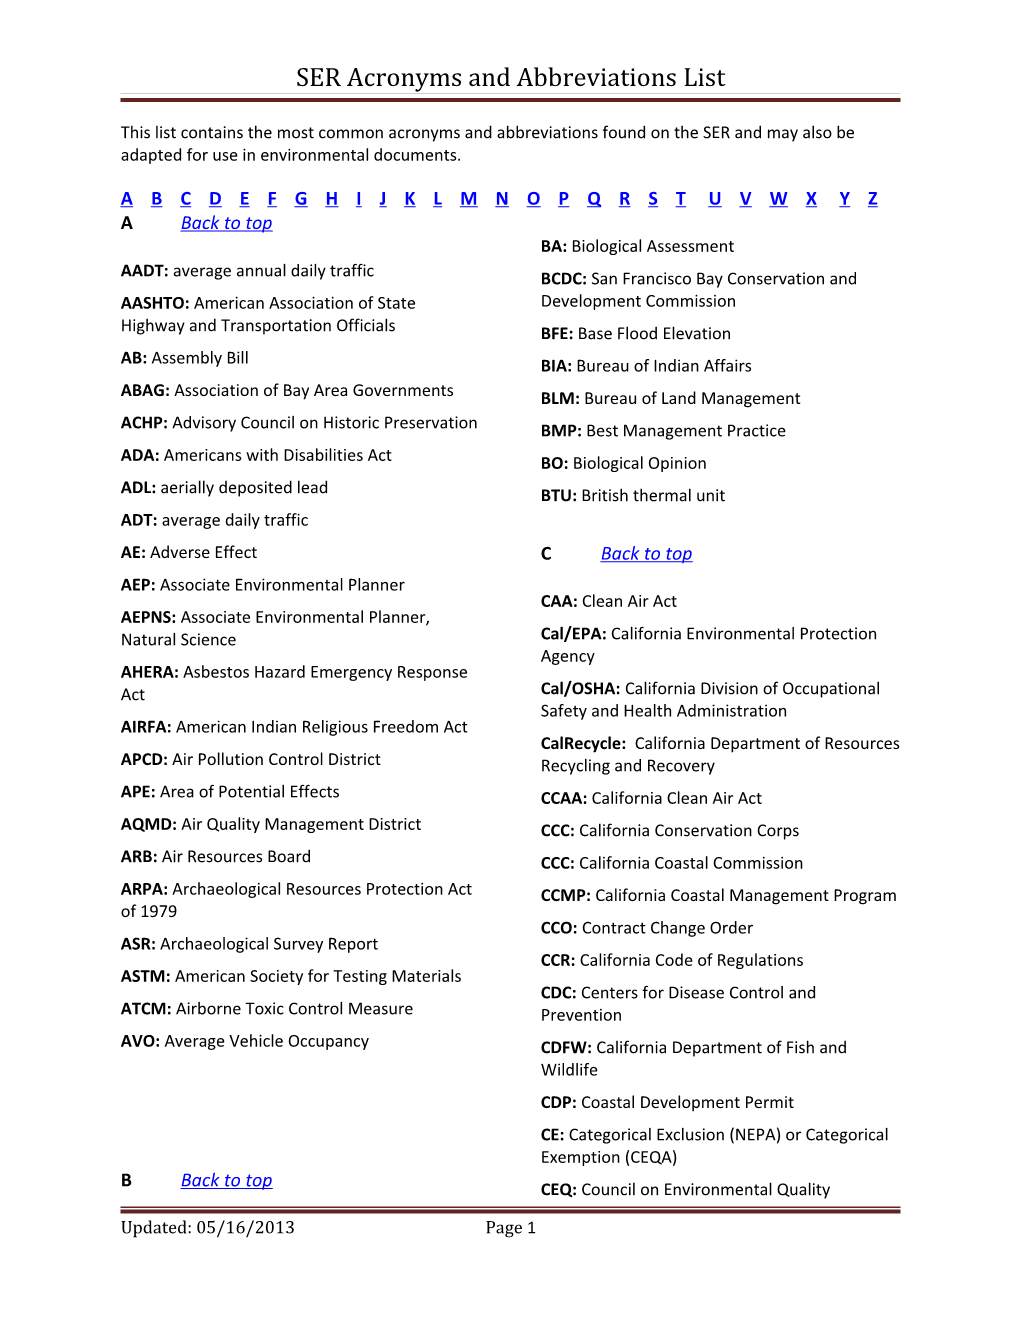 SER Acronyms and Abbreviations List